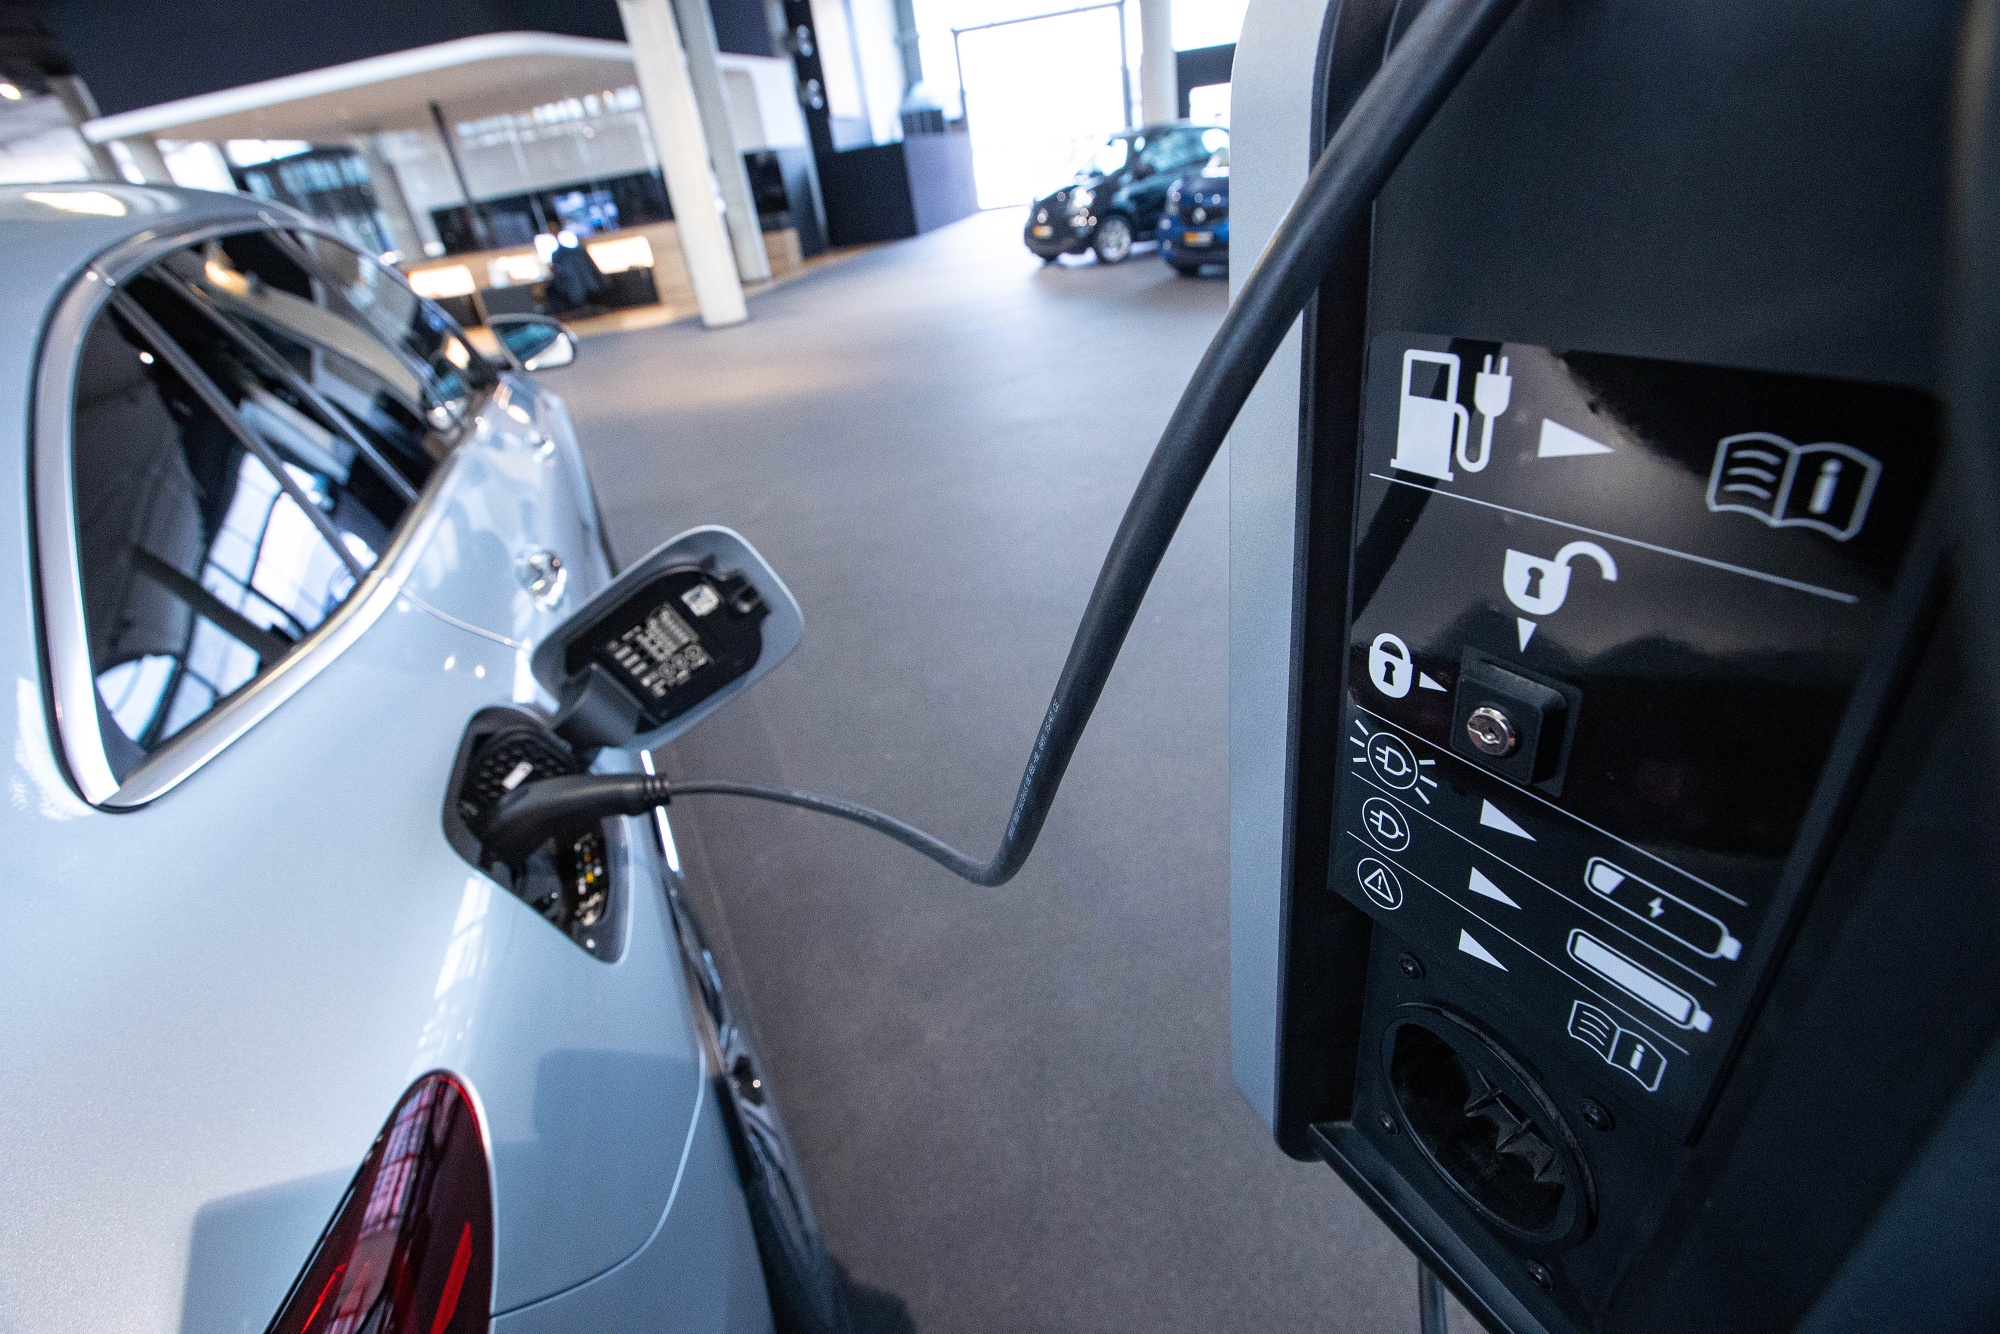 The Front Trunk Is Electric Cars' Most Divisive Feature - Bloomberg